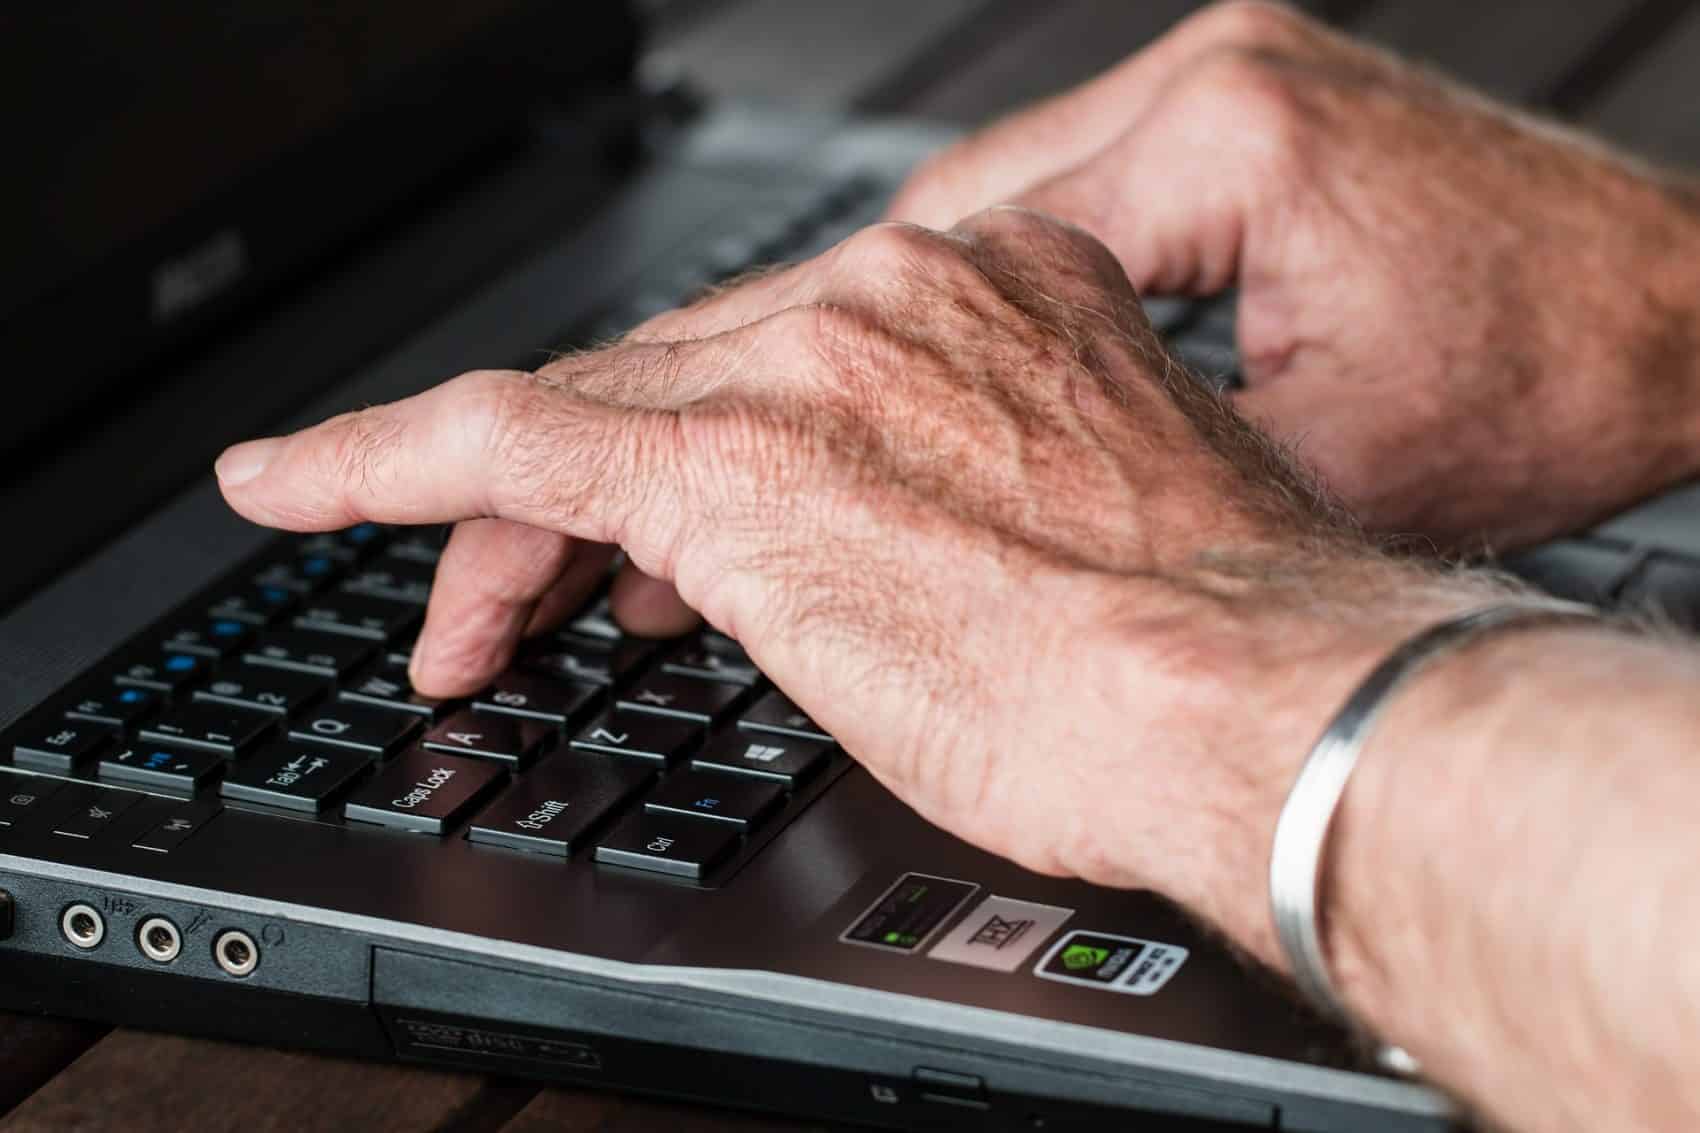 Fingers typing on a computer keyboard